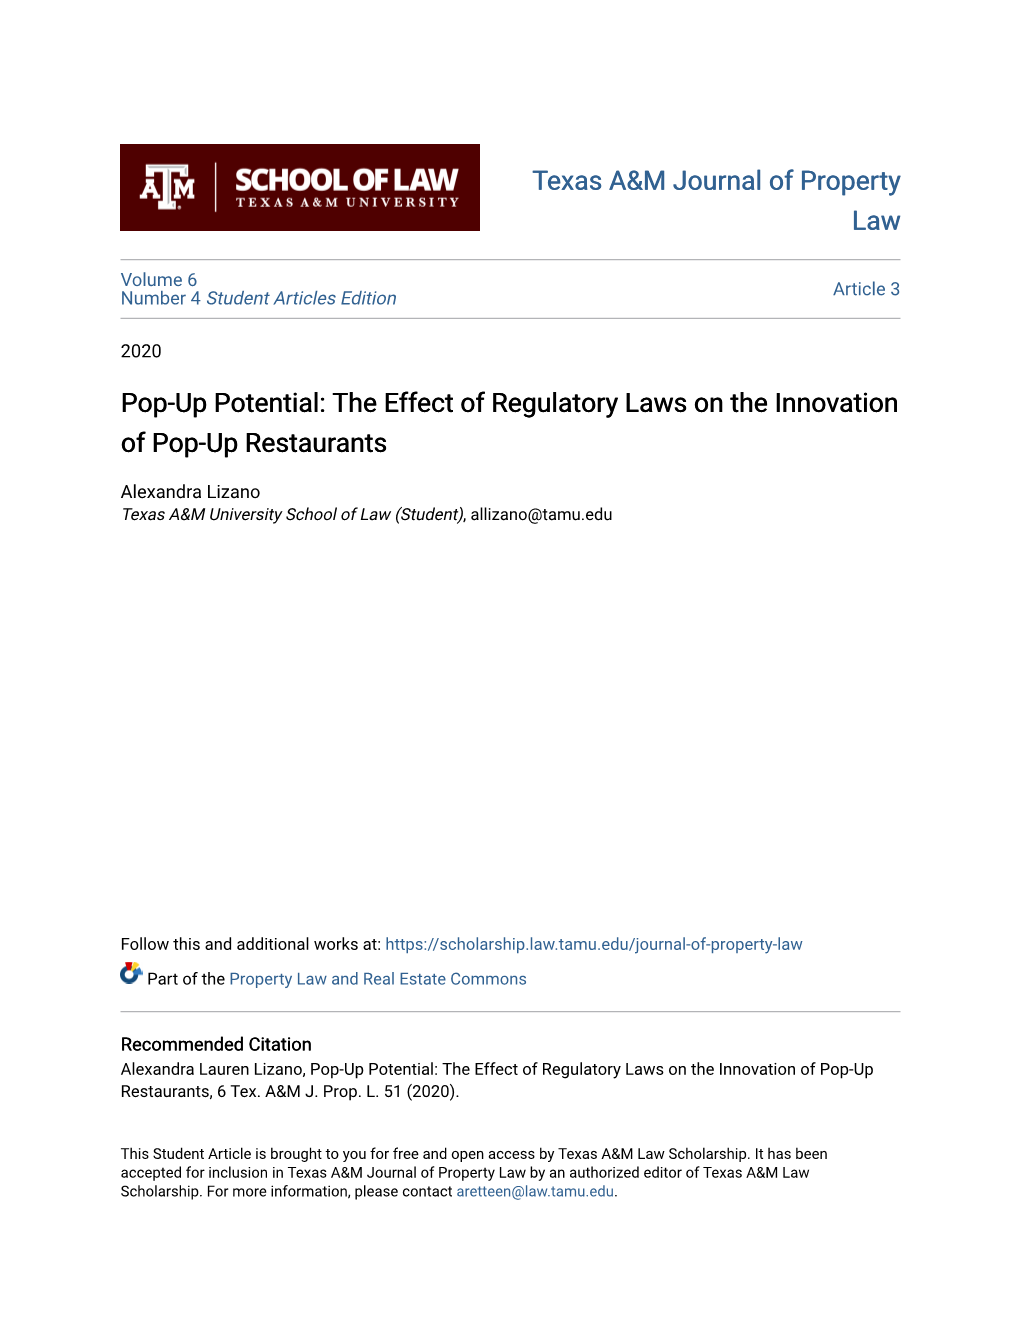 The Effect of Regulatory Laws on the Innovation of Pop-Up Restaurants